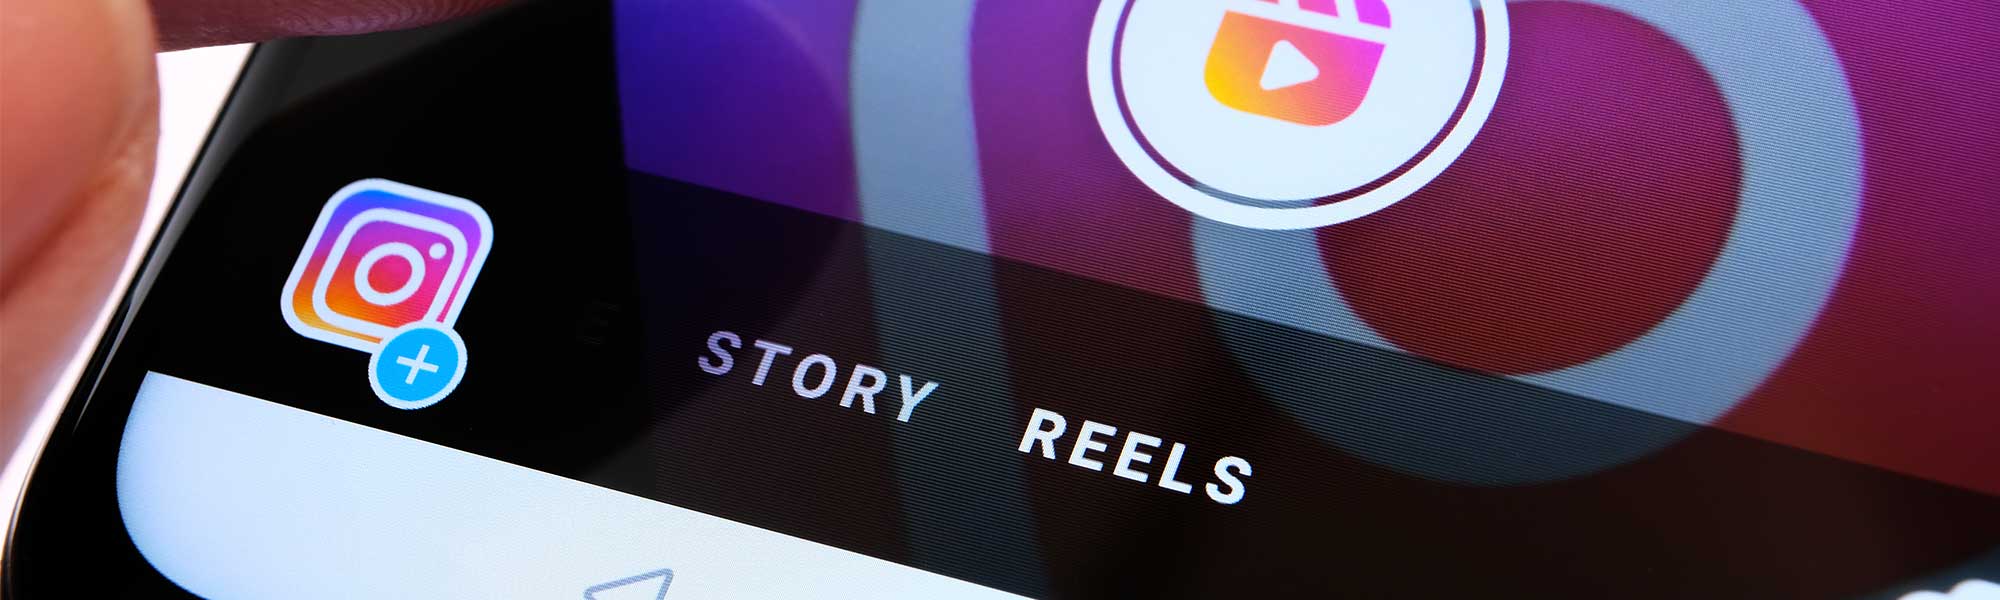 Close up of a smartphone screen with the Instagram logo and words "Story" and "Reels"